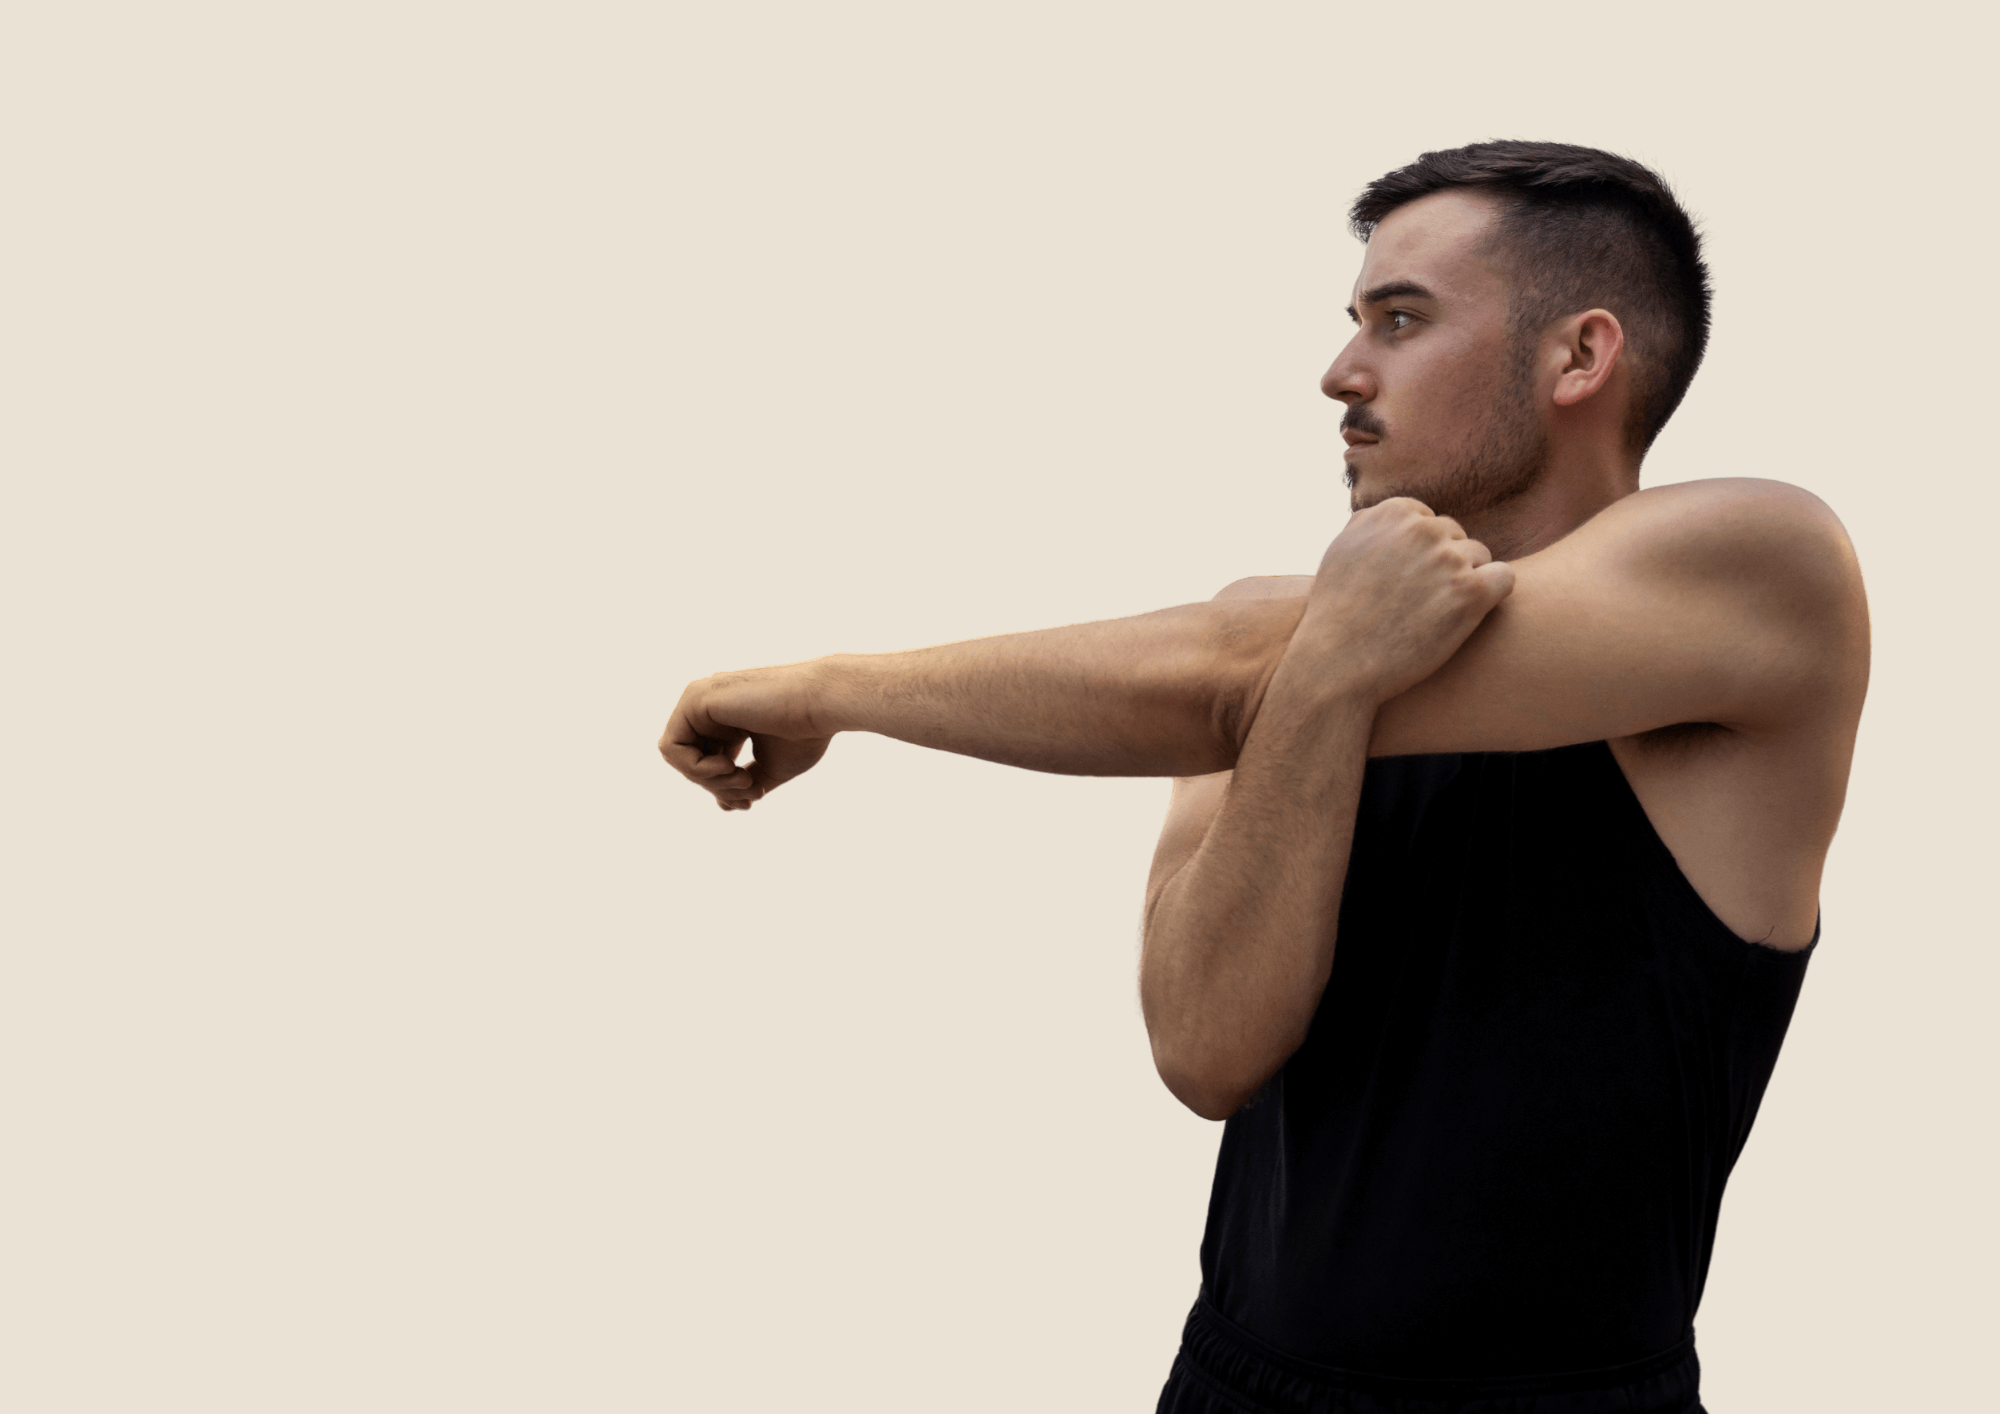 Man in black shirt is stretching his arm and shoulder. Beige Background.